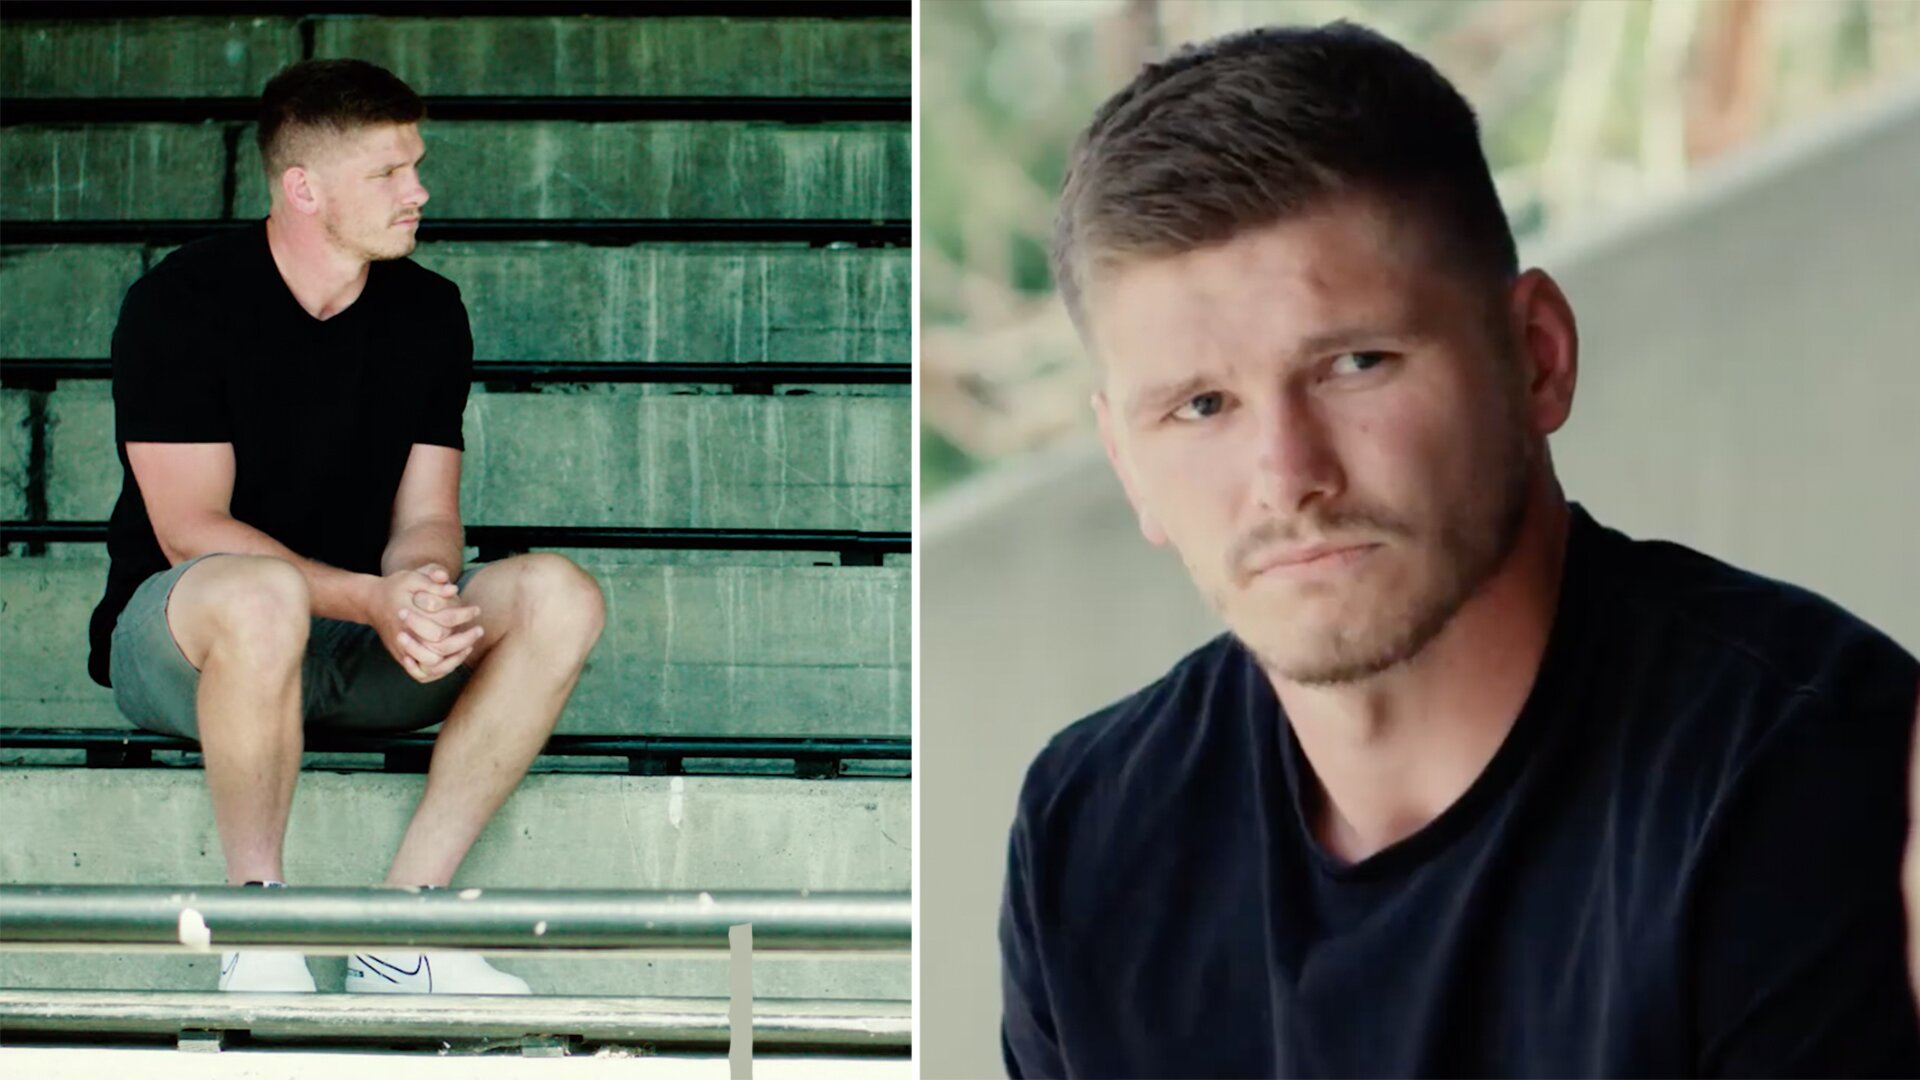 Owen Farrell releases revealing new video on some of the biggest struggles in his life